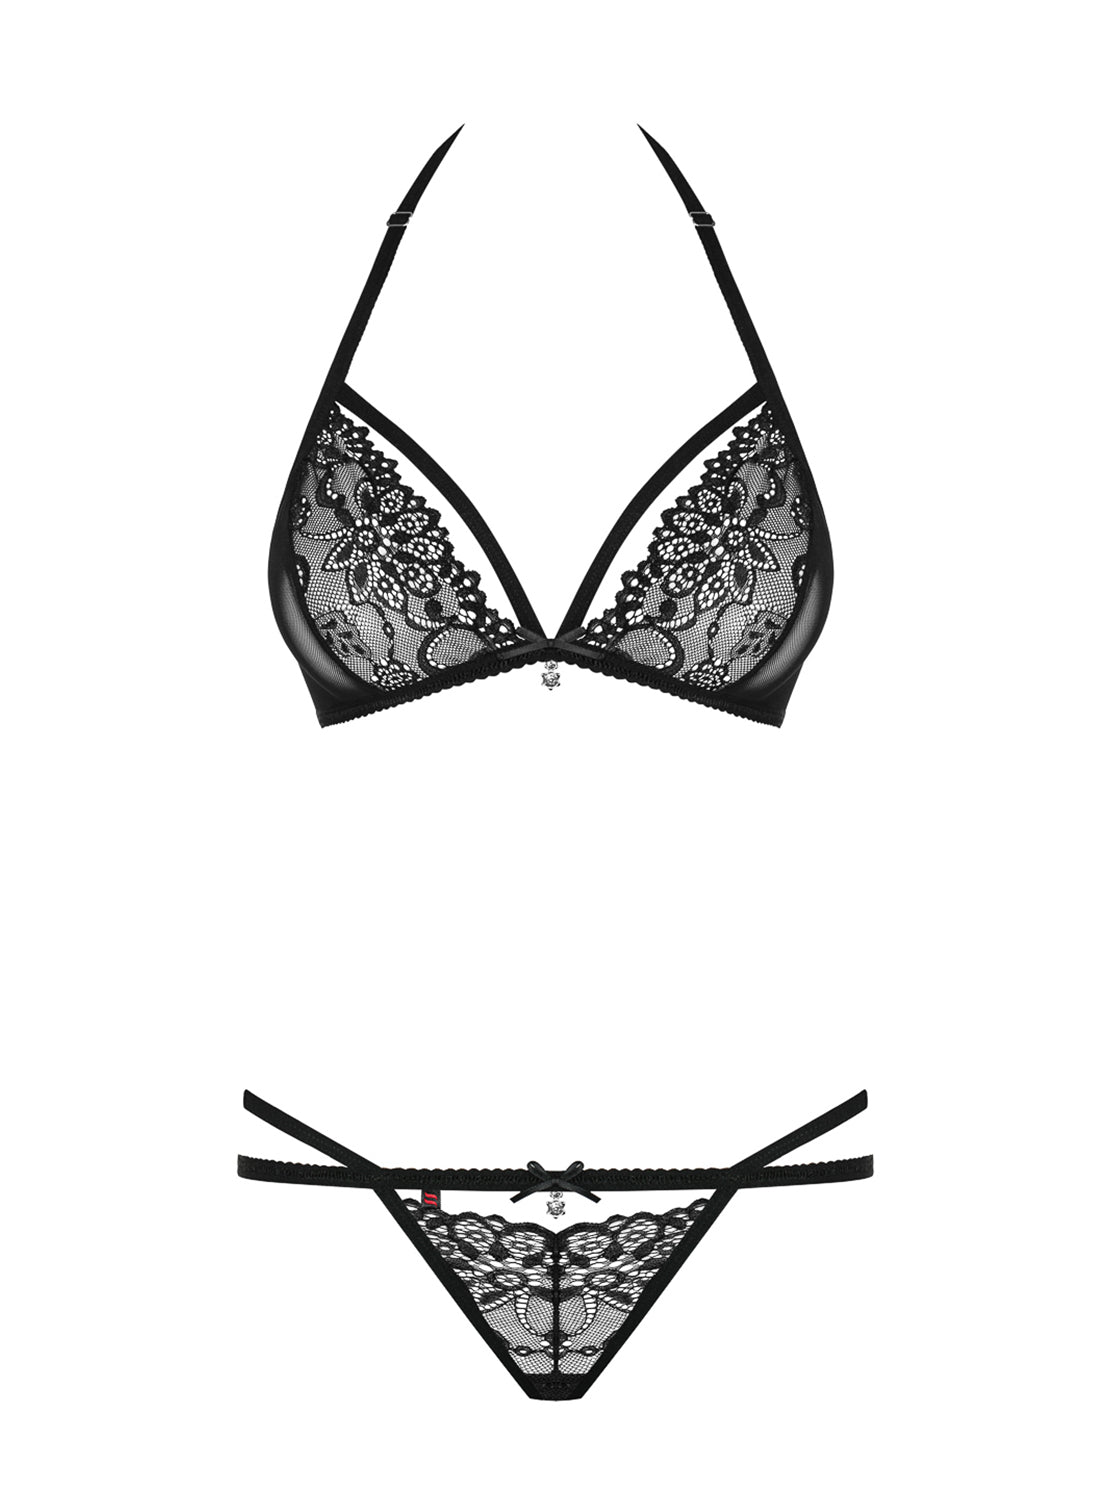 Charming bra set with lace and shiny decorative details